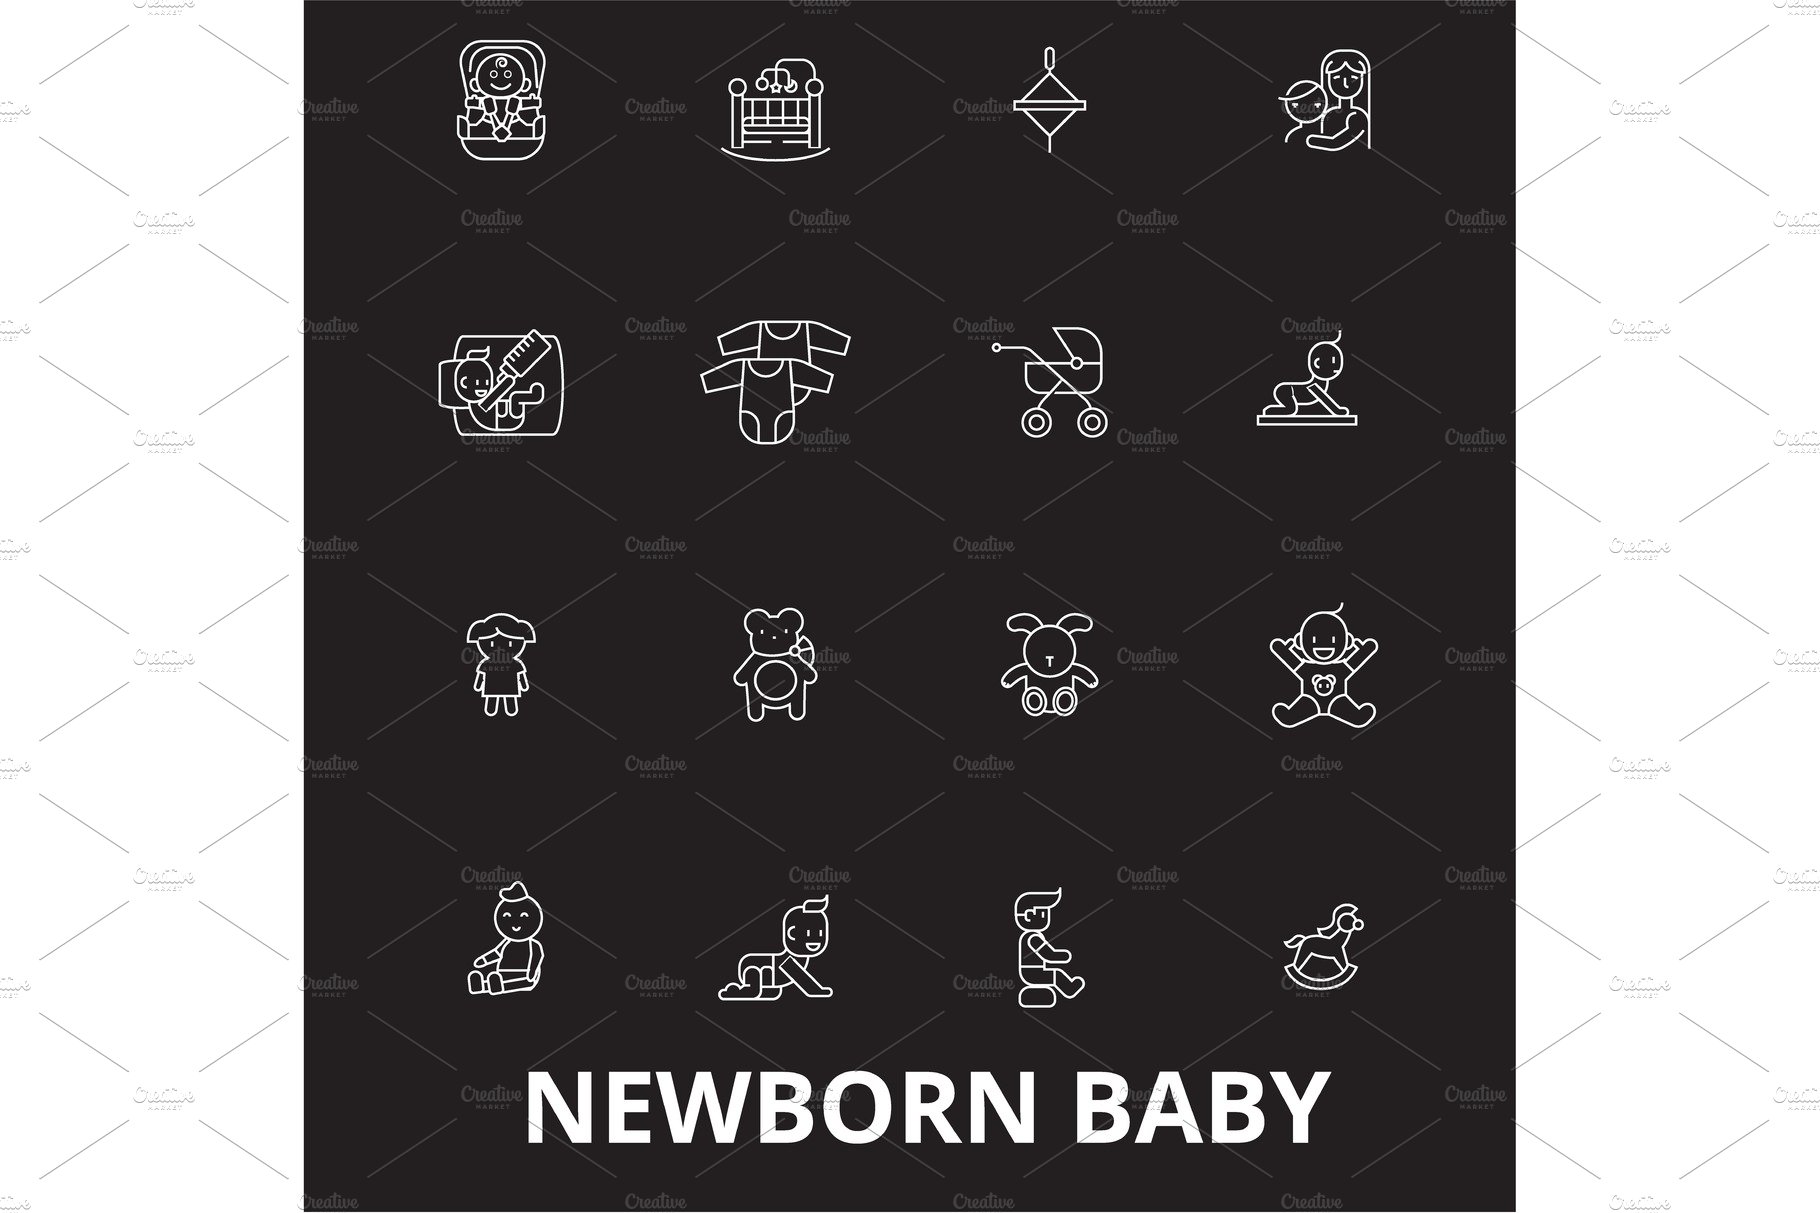 Newborn baby editable line icons cover image.